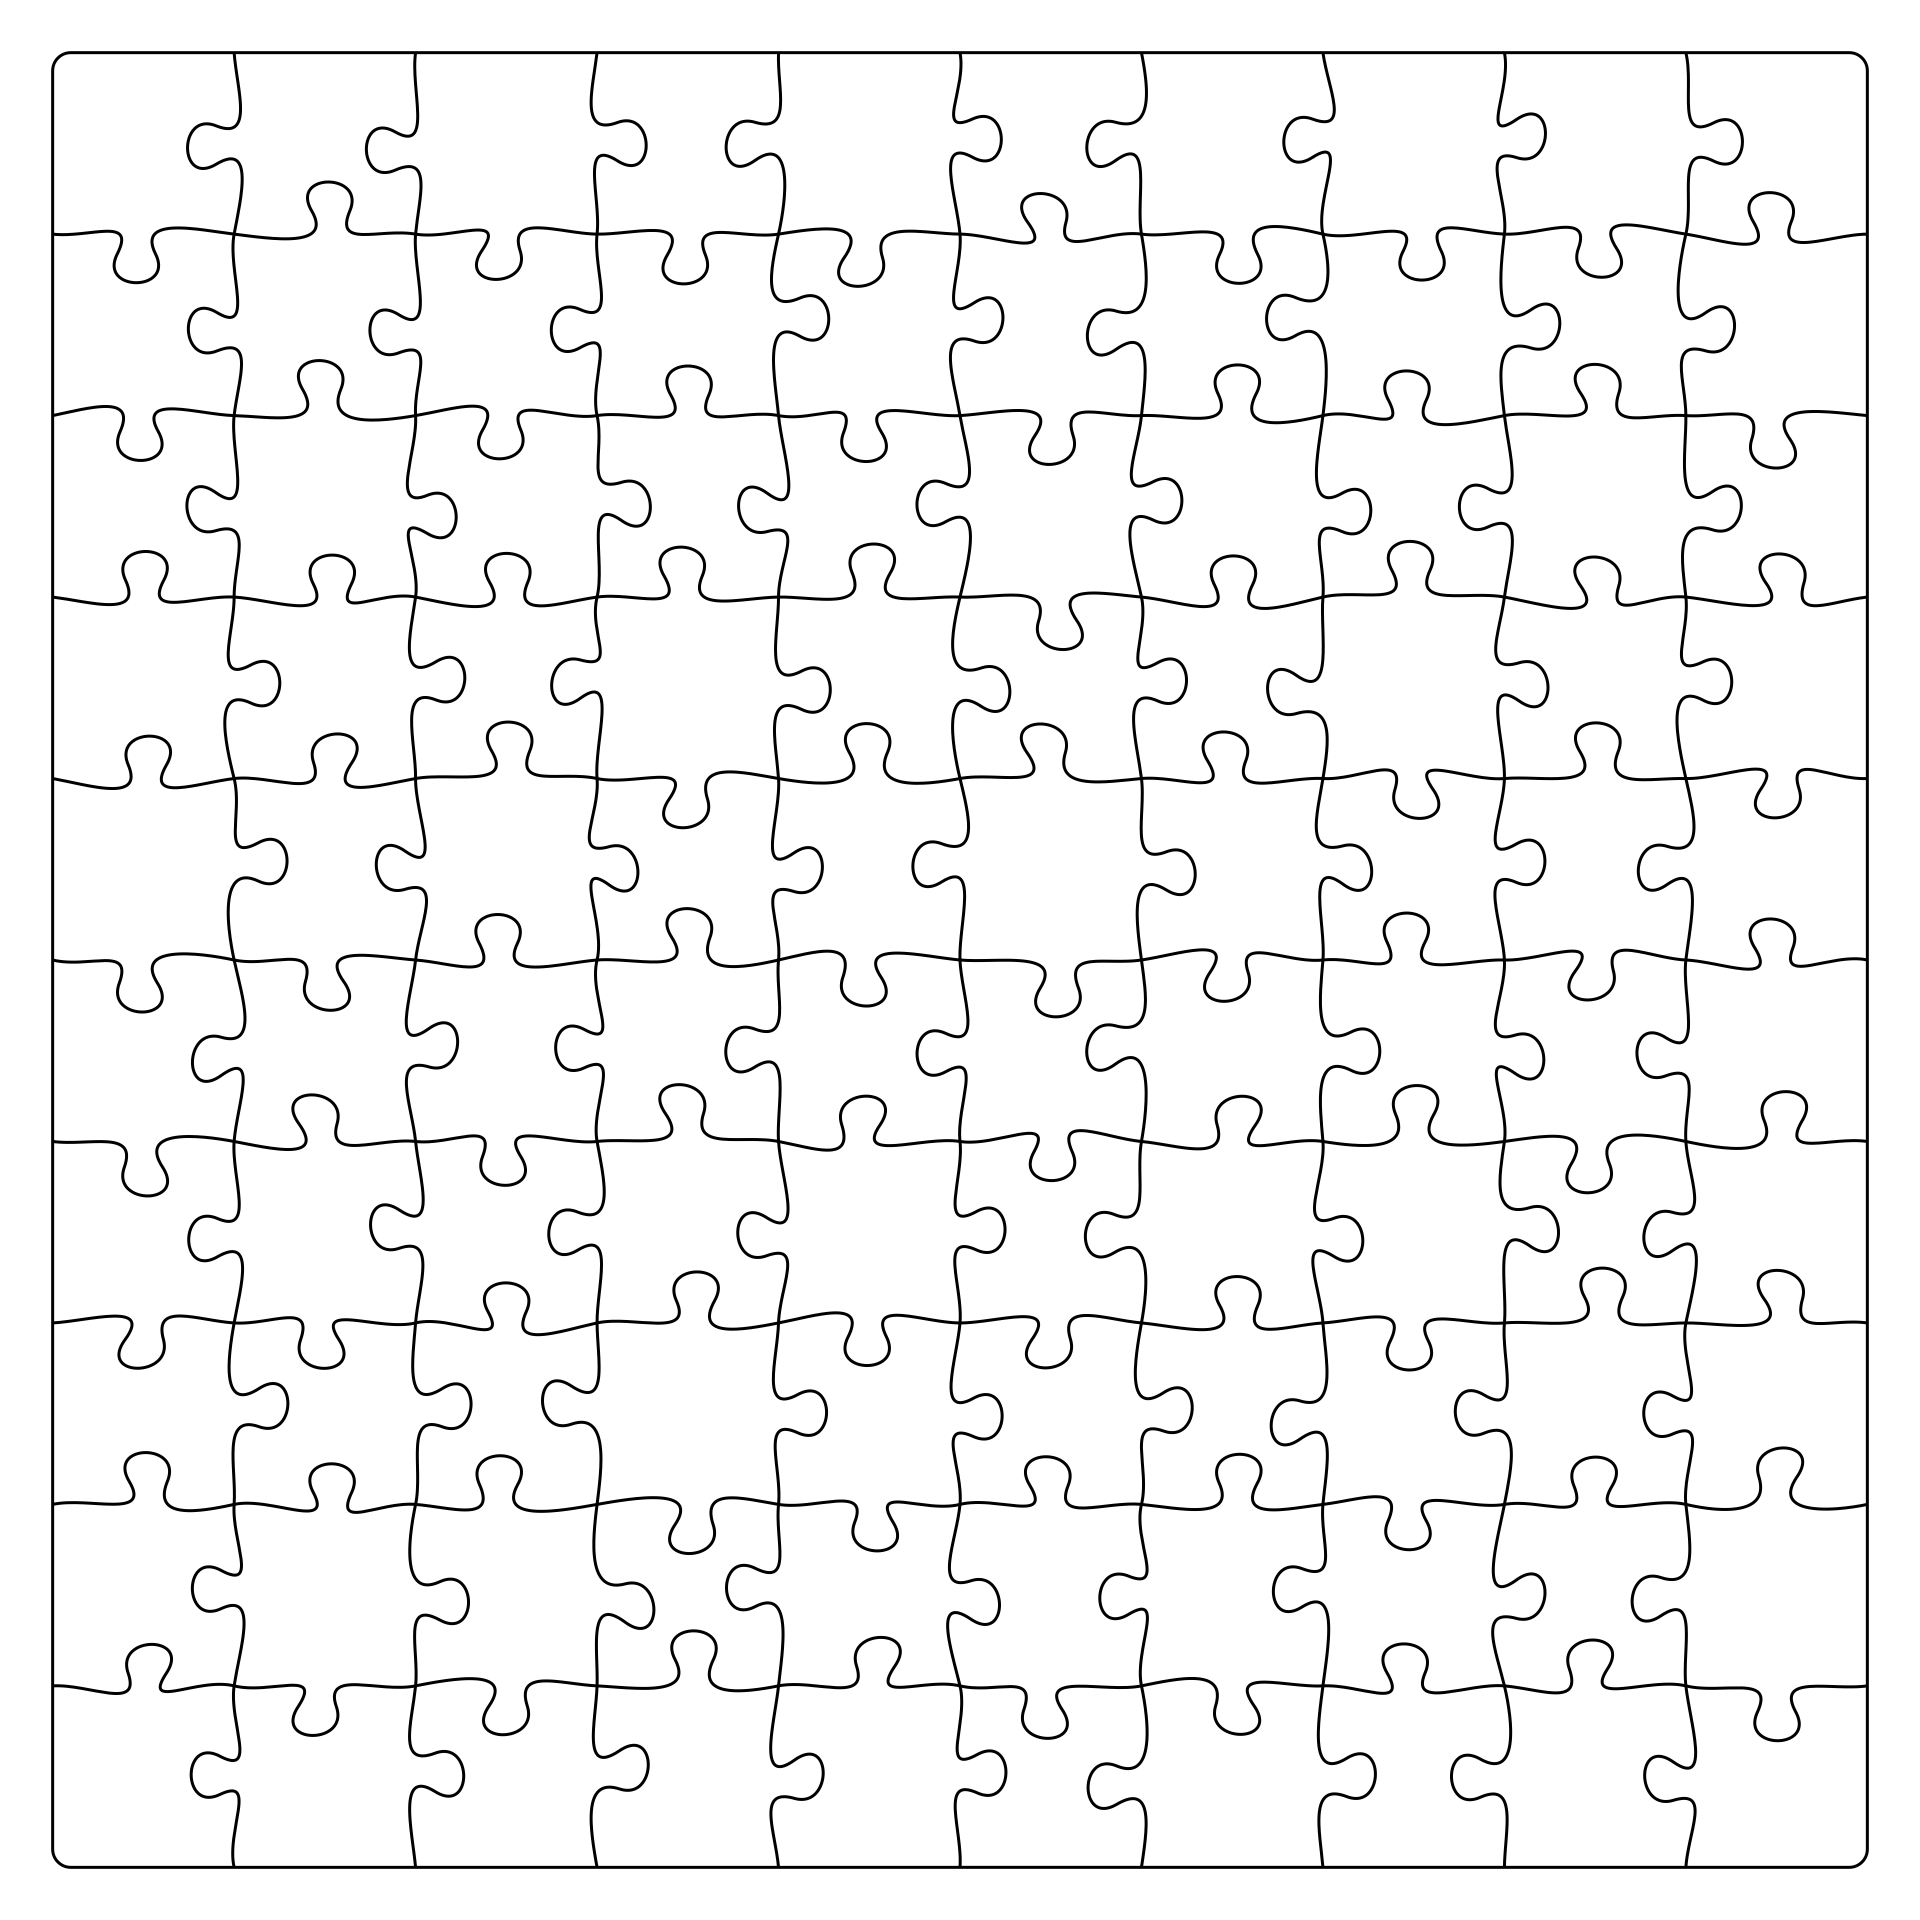 10 Best 9 Piece Jigsaw Puzzle Template Printable PDF for Free at Printablee